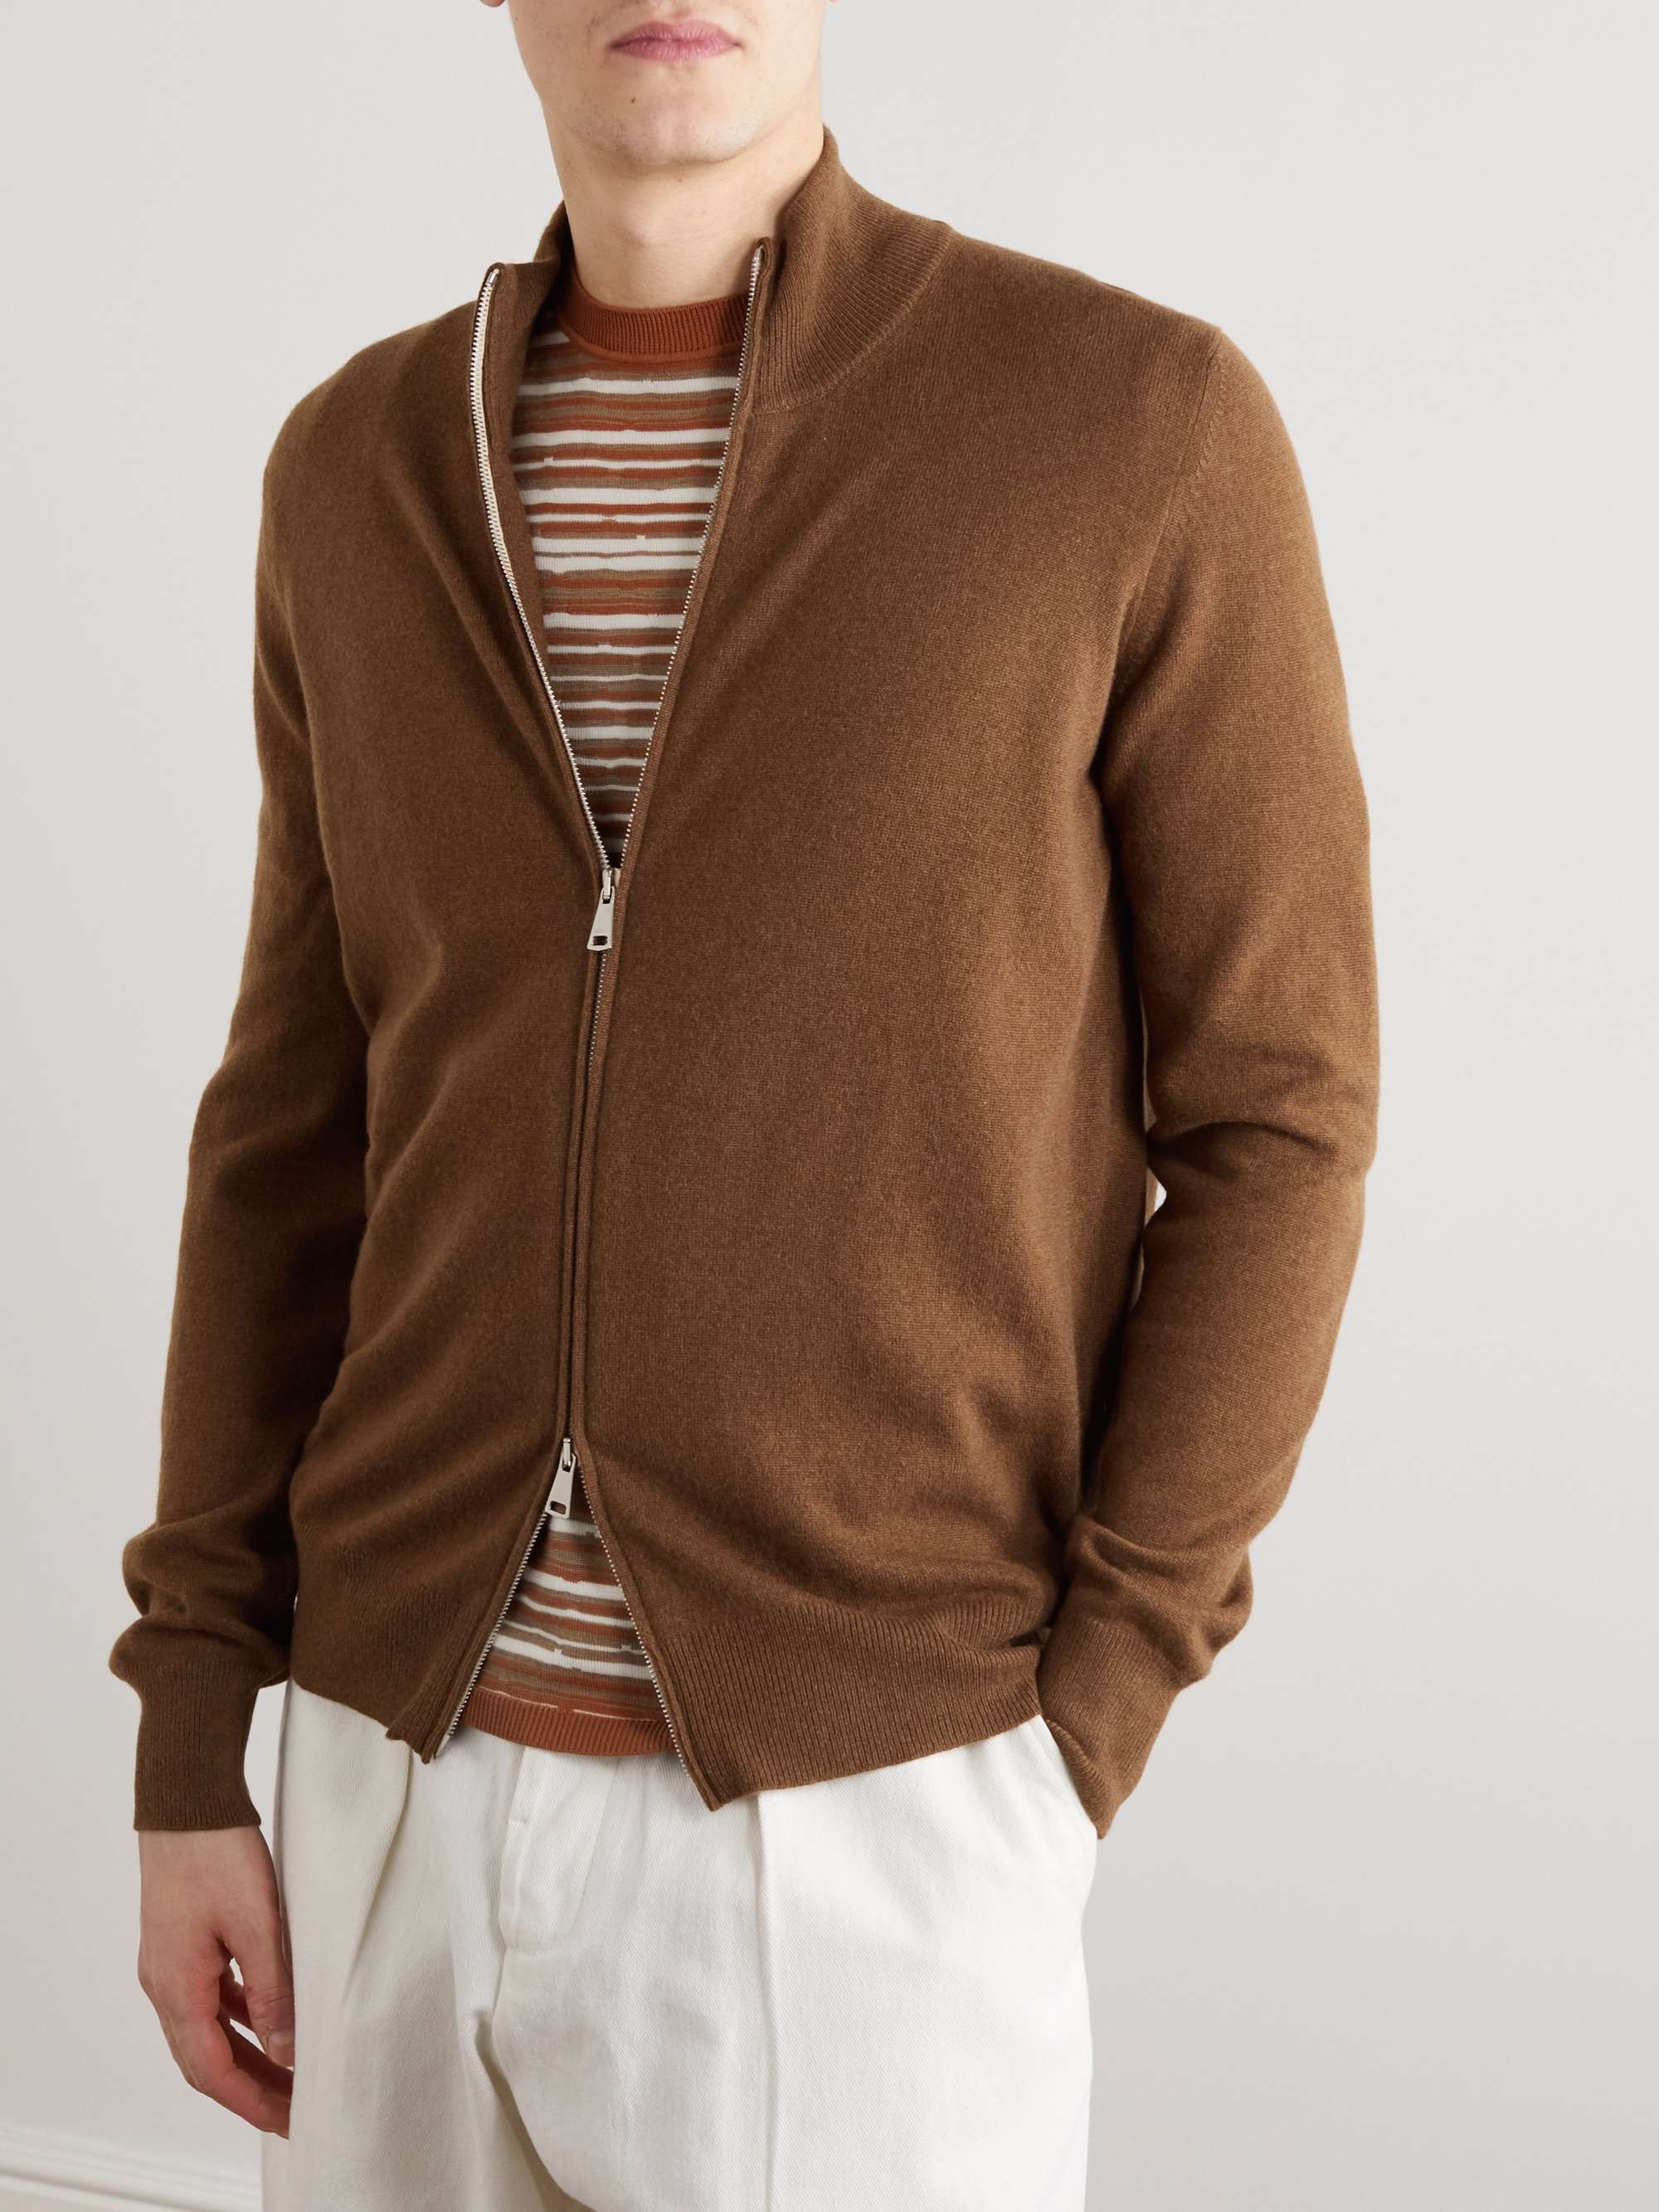 GHIAIA CASHMERE Cashmere Zip-Up Sweater